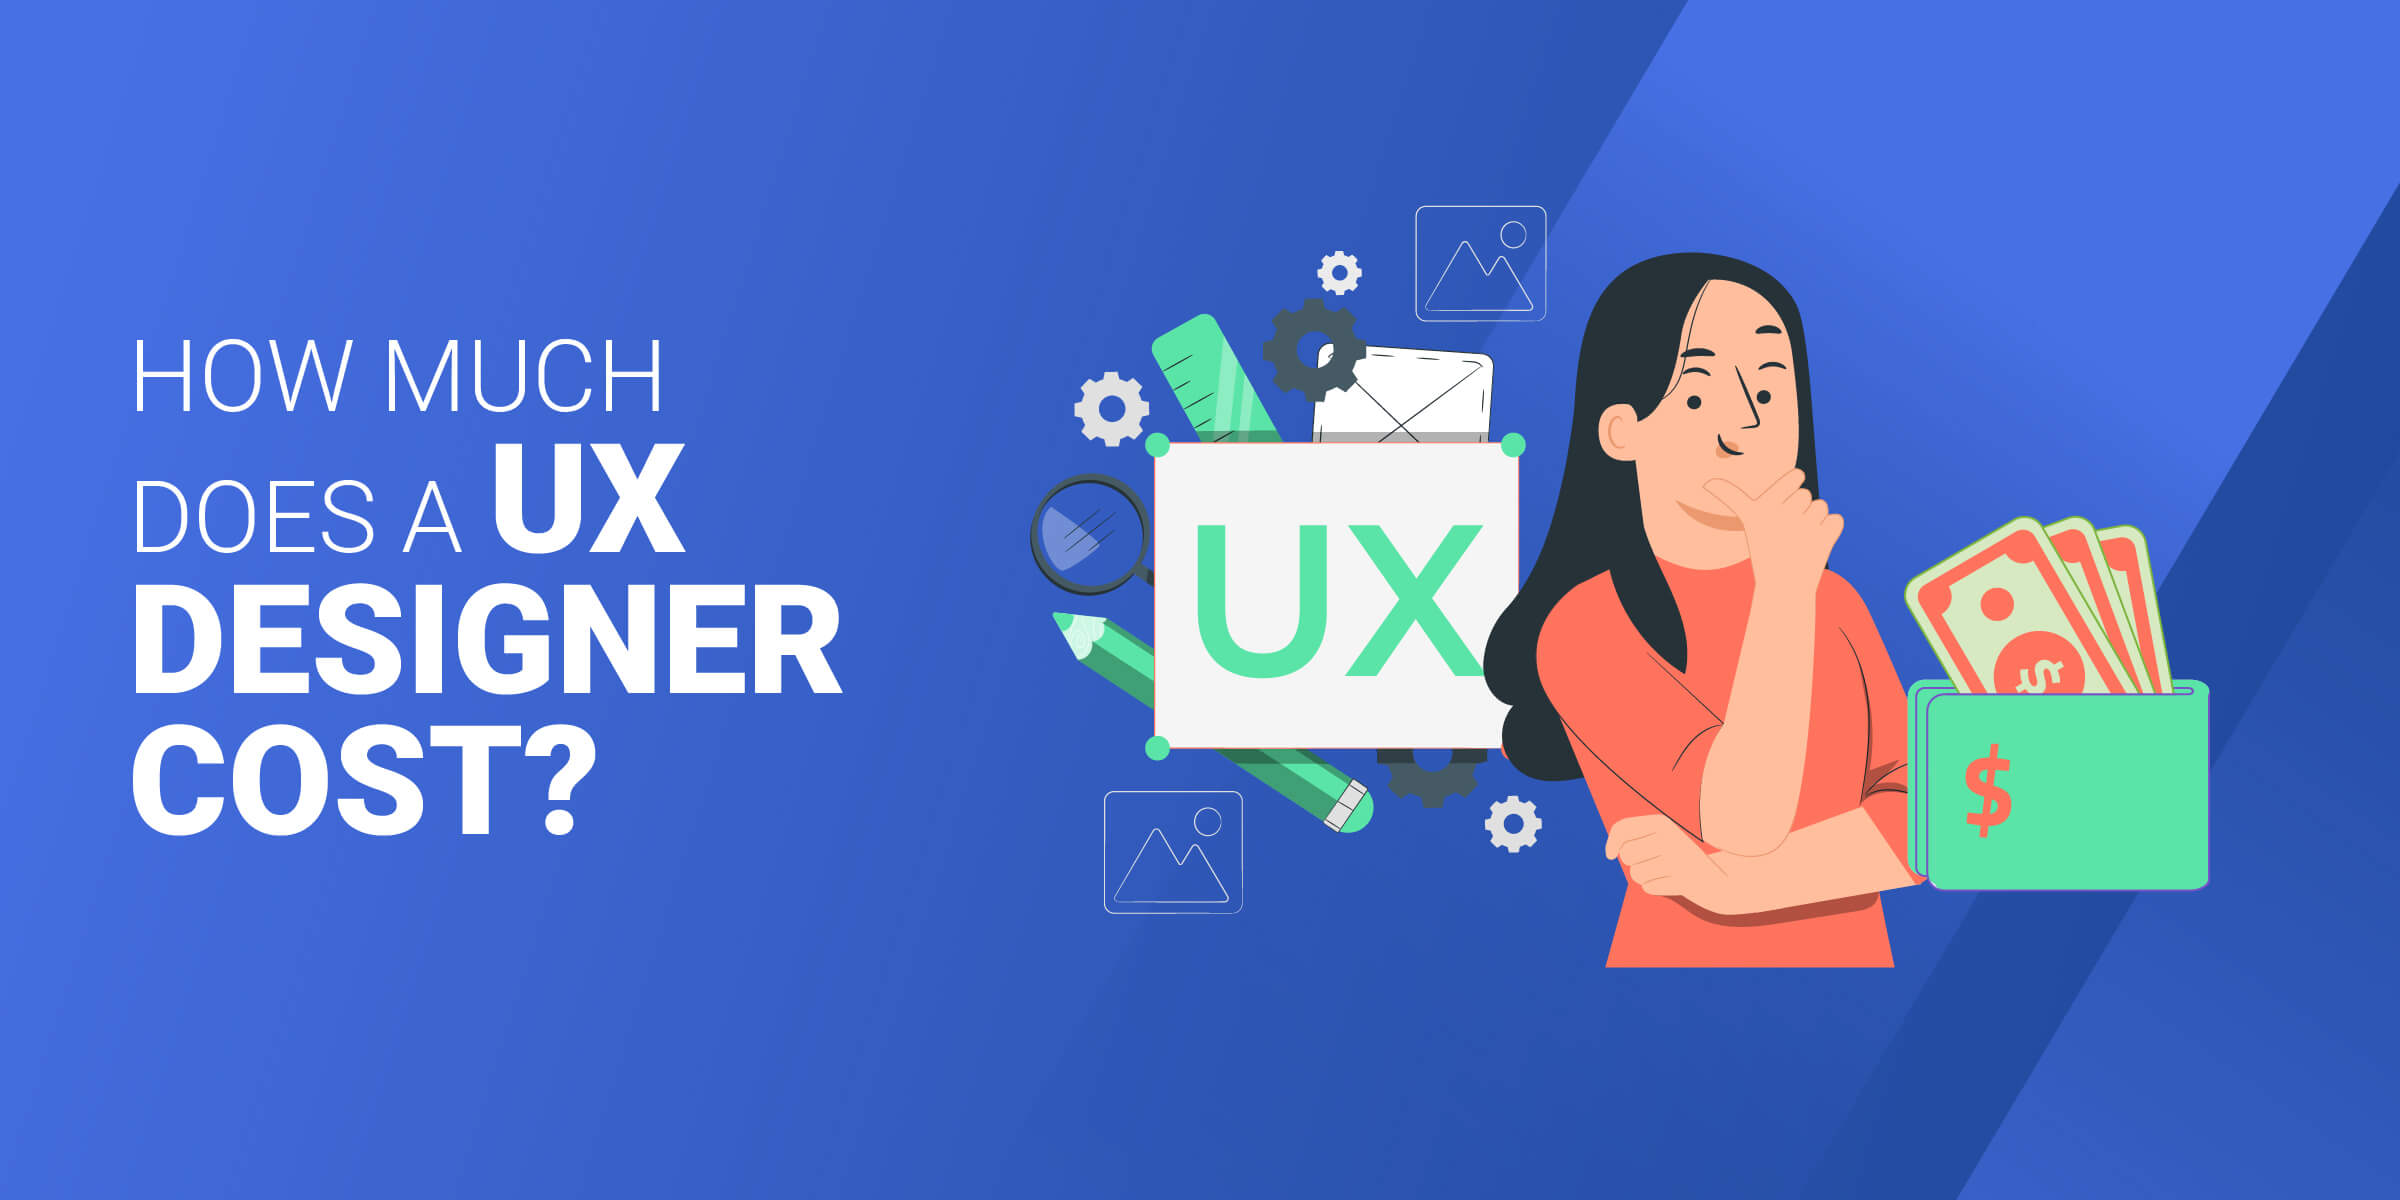 How Much Does a UX Designer Cost